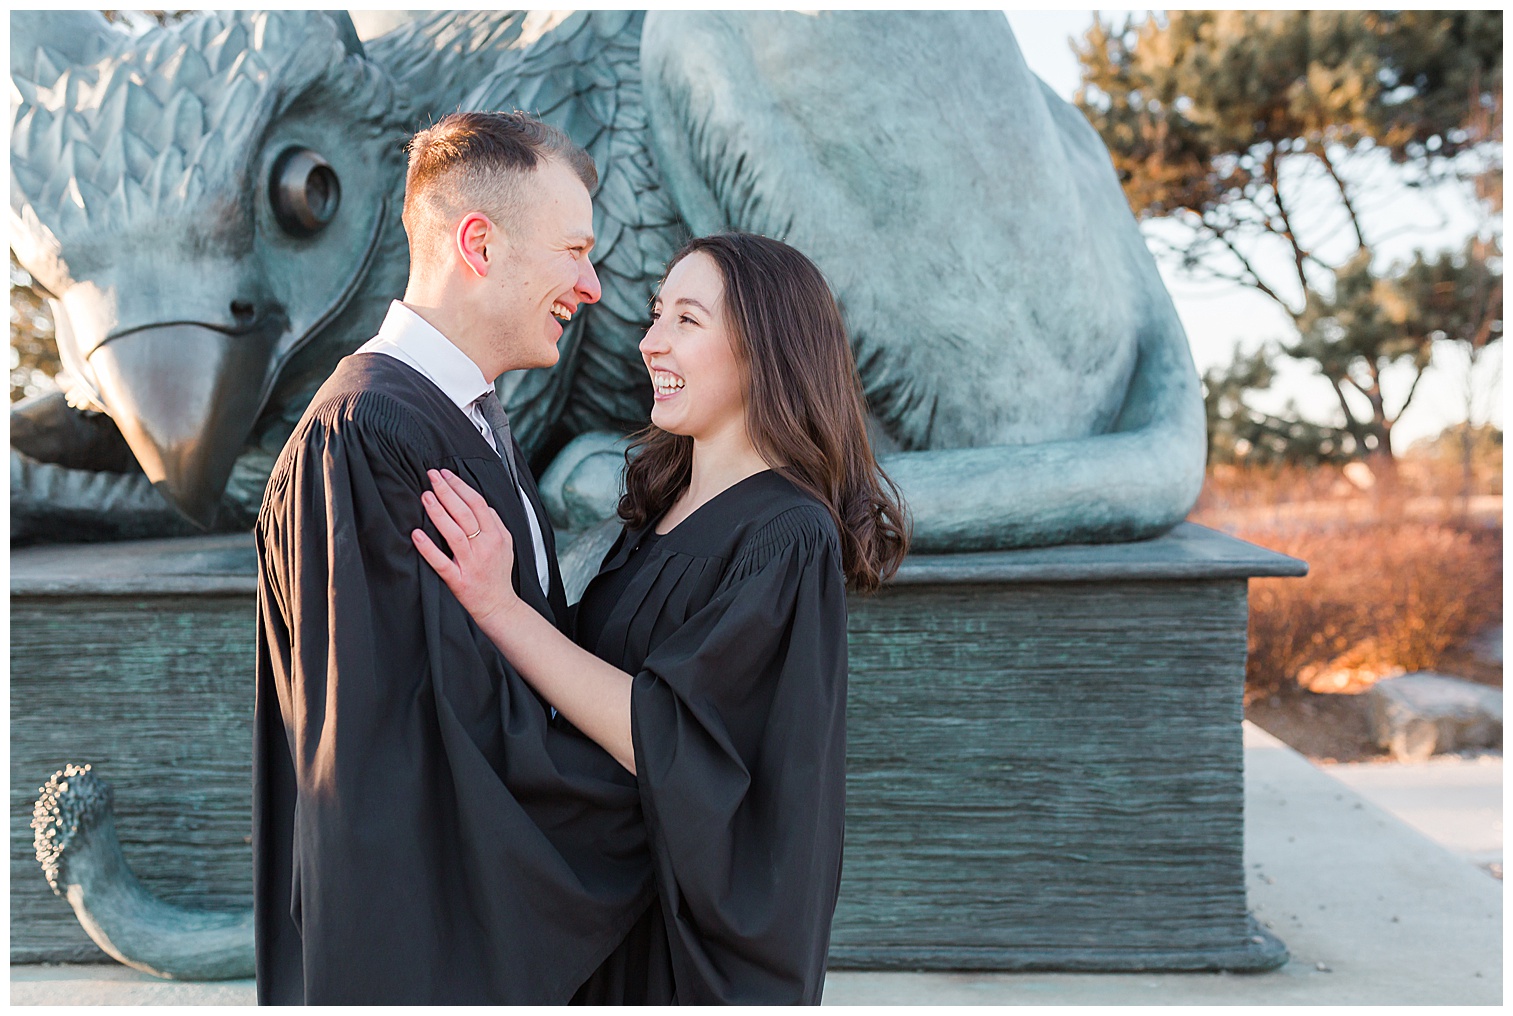 Graduation photos at the University of Guelph with Ariana del Mundo Photography and ADM Gryphon Grads